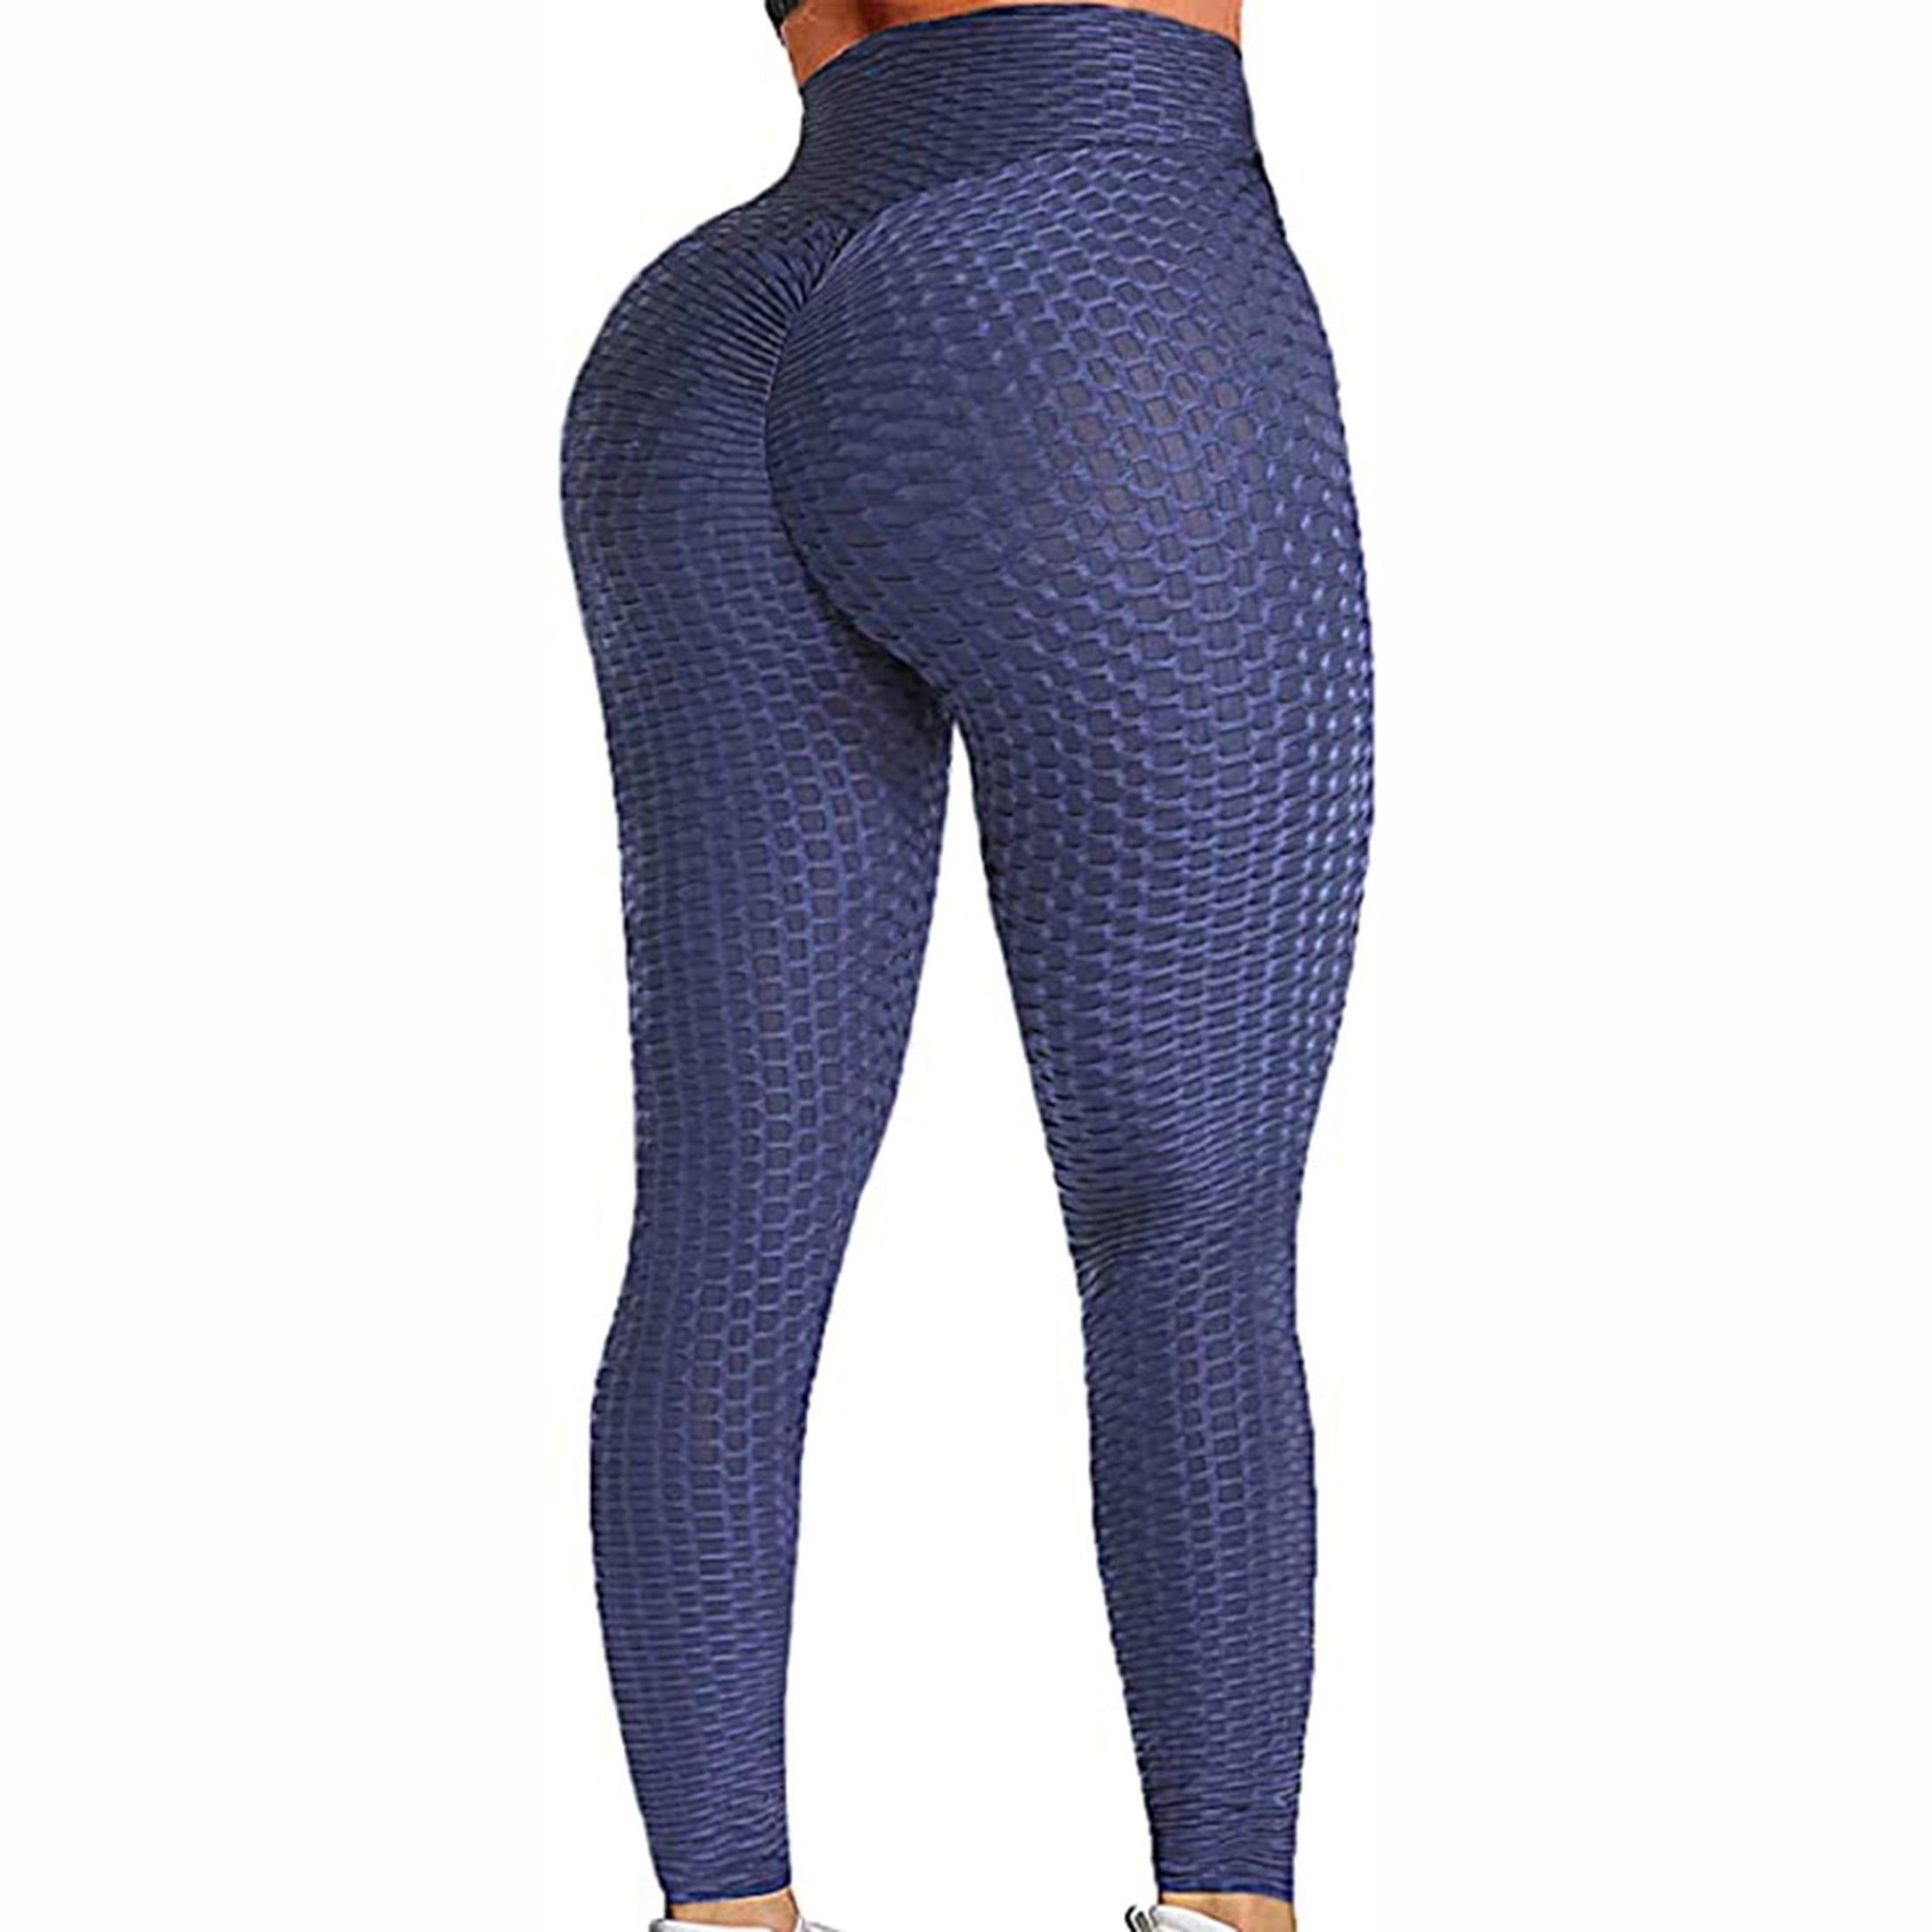 JGS1996 High Waist Butt Lifting Leggings for Women Tummy Control Workout  Ruched Butt Lifting Stretchy Yoga Pants Textured Booty Tights 